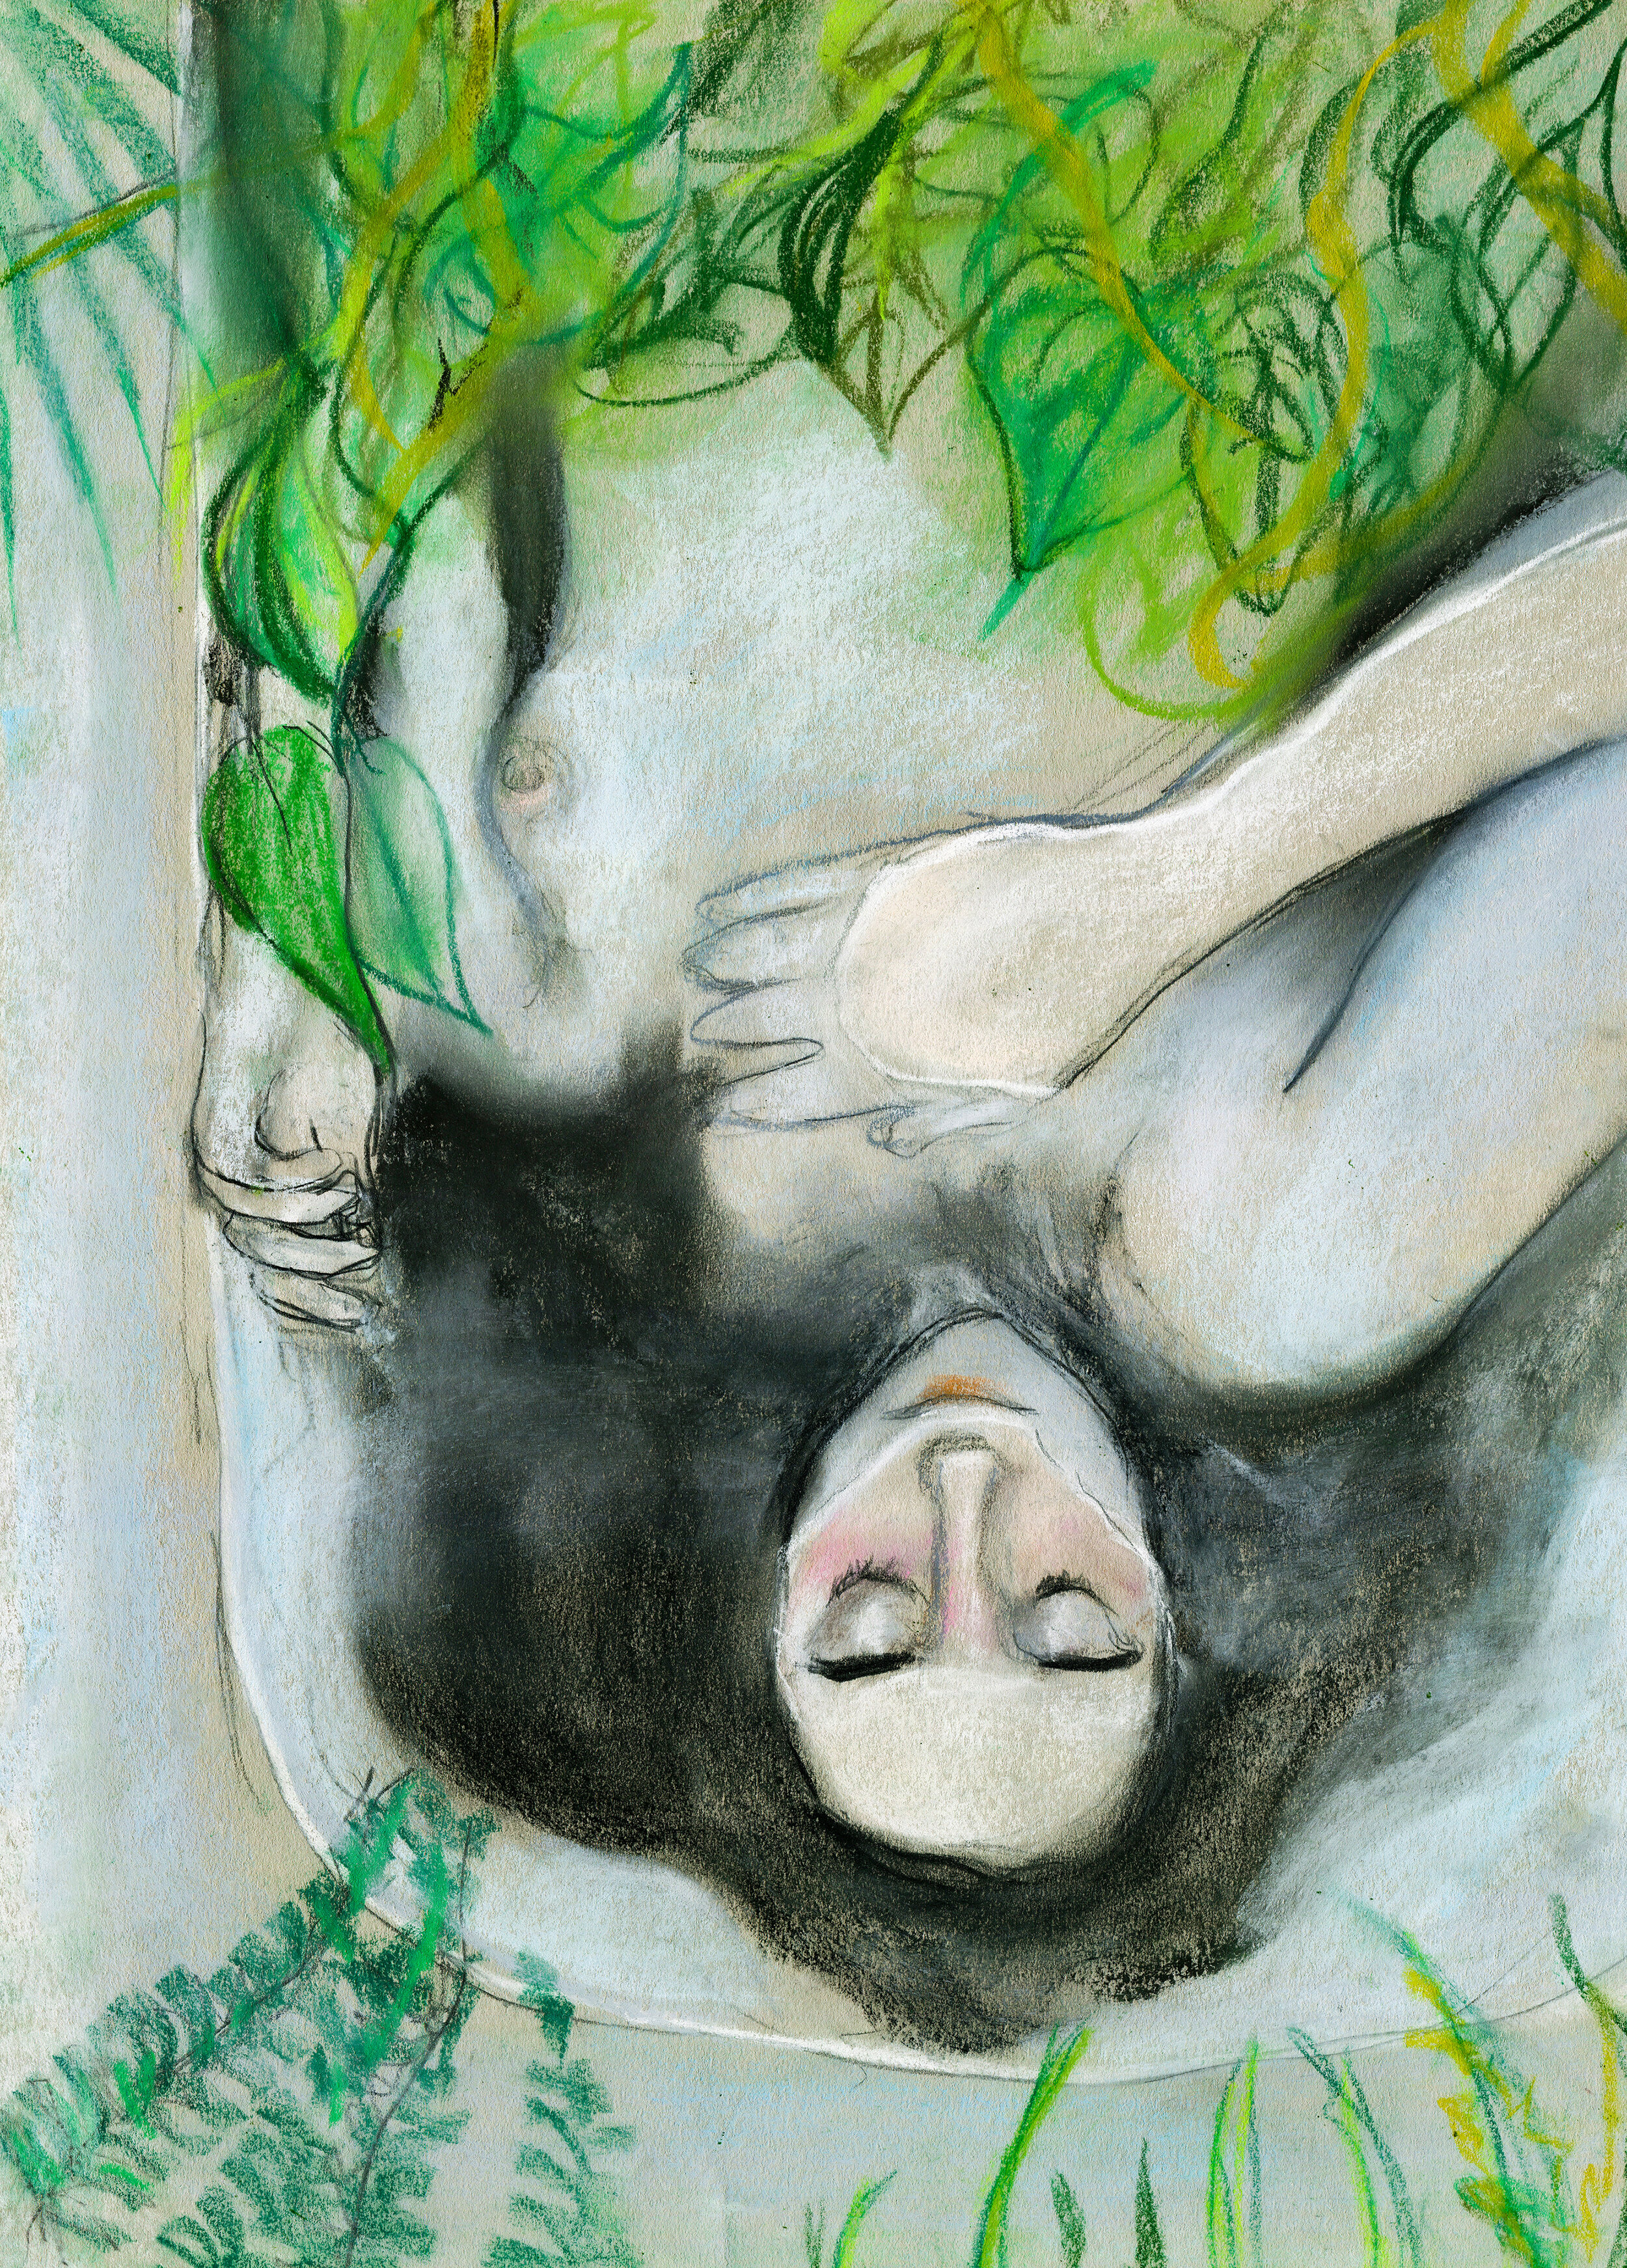 Daintree Dreaming in the Bath VIII (Inspired by Ophelia)